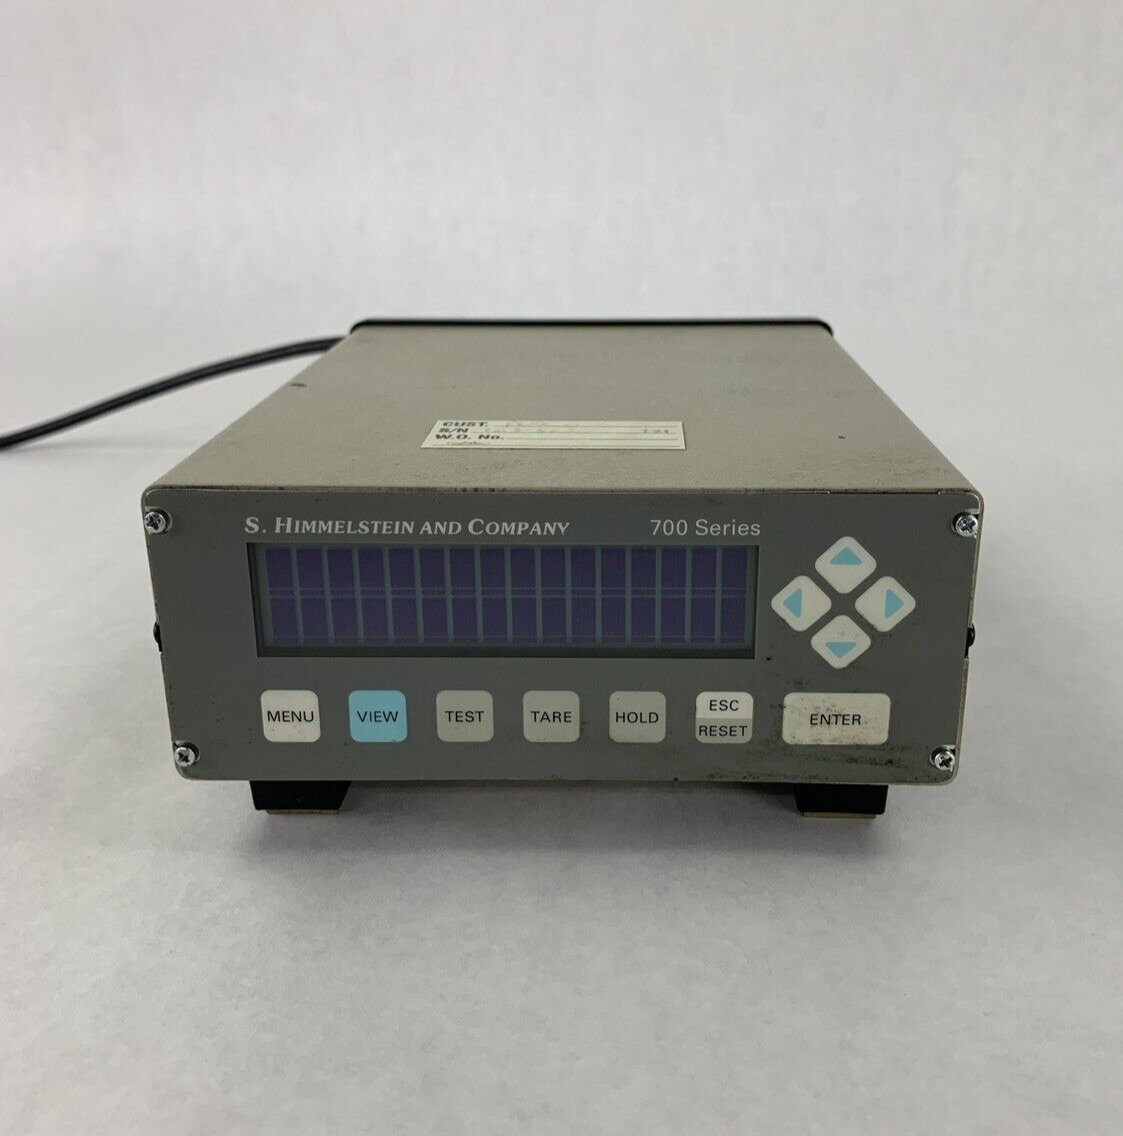 S. Himmelstein and Company 700 Series Transducer Signal Conditioner Power Tested